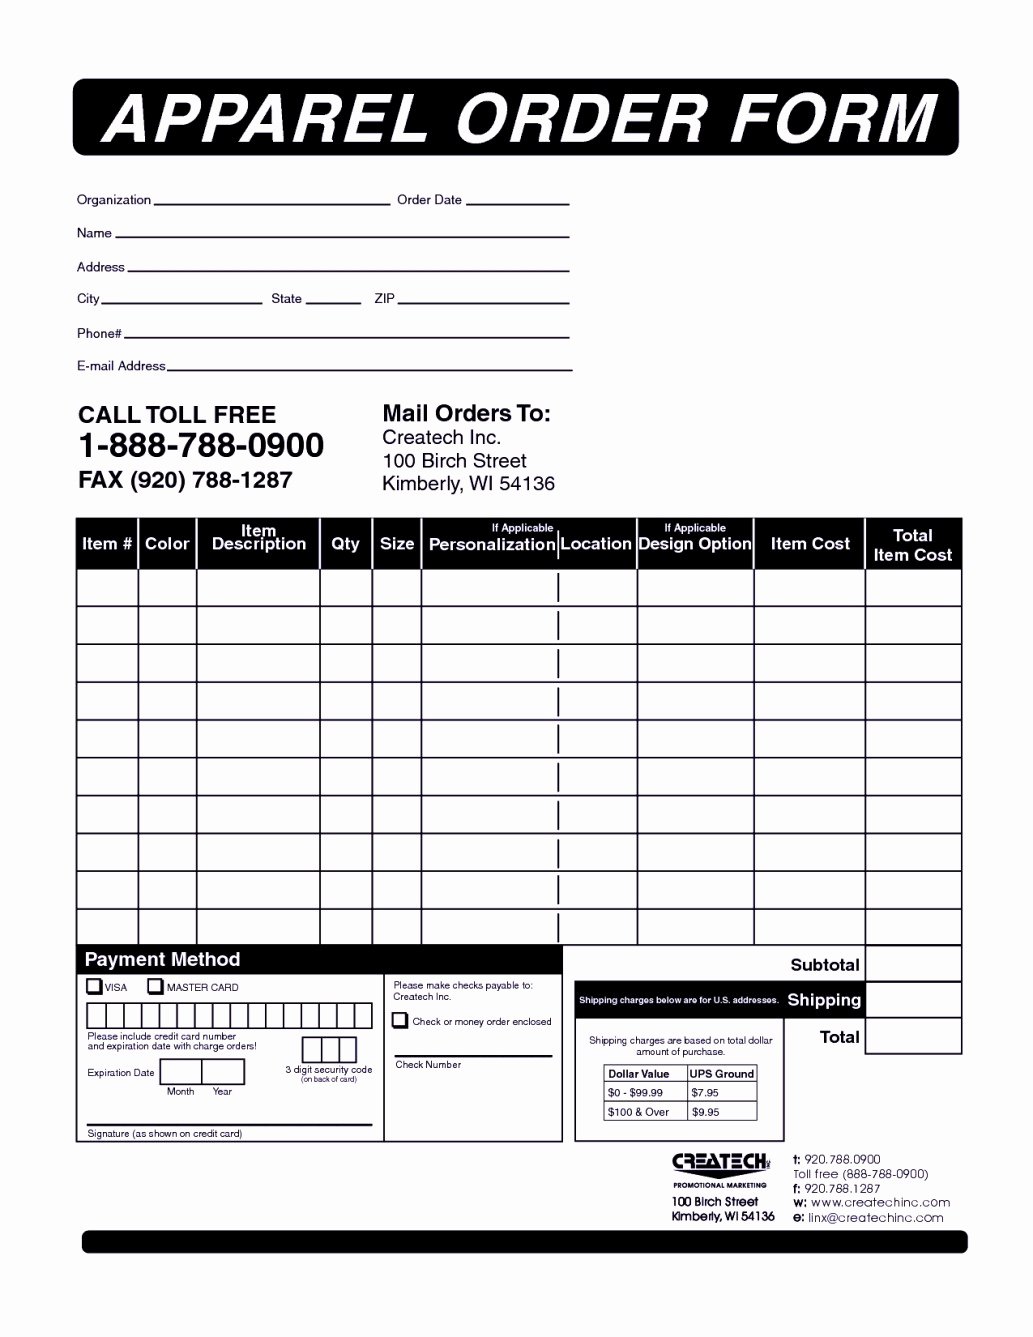 Apparel order form Template Awesome Clothing order form Templates Template Update234